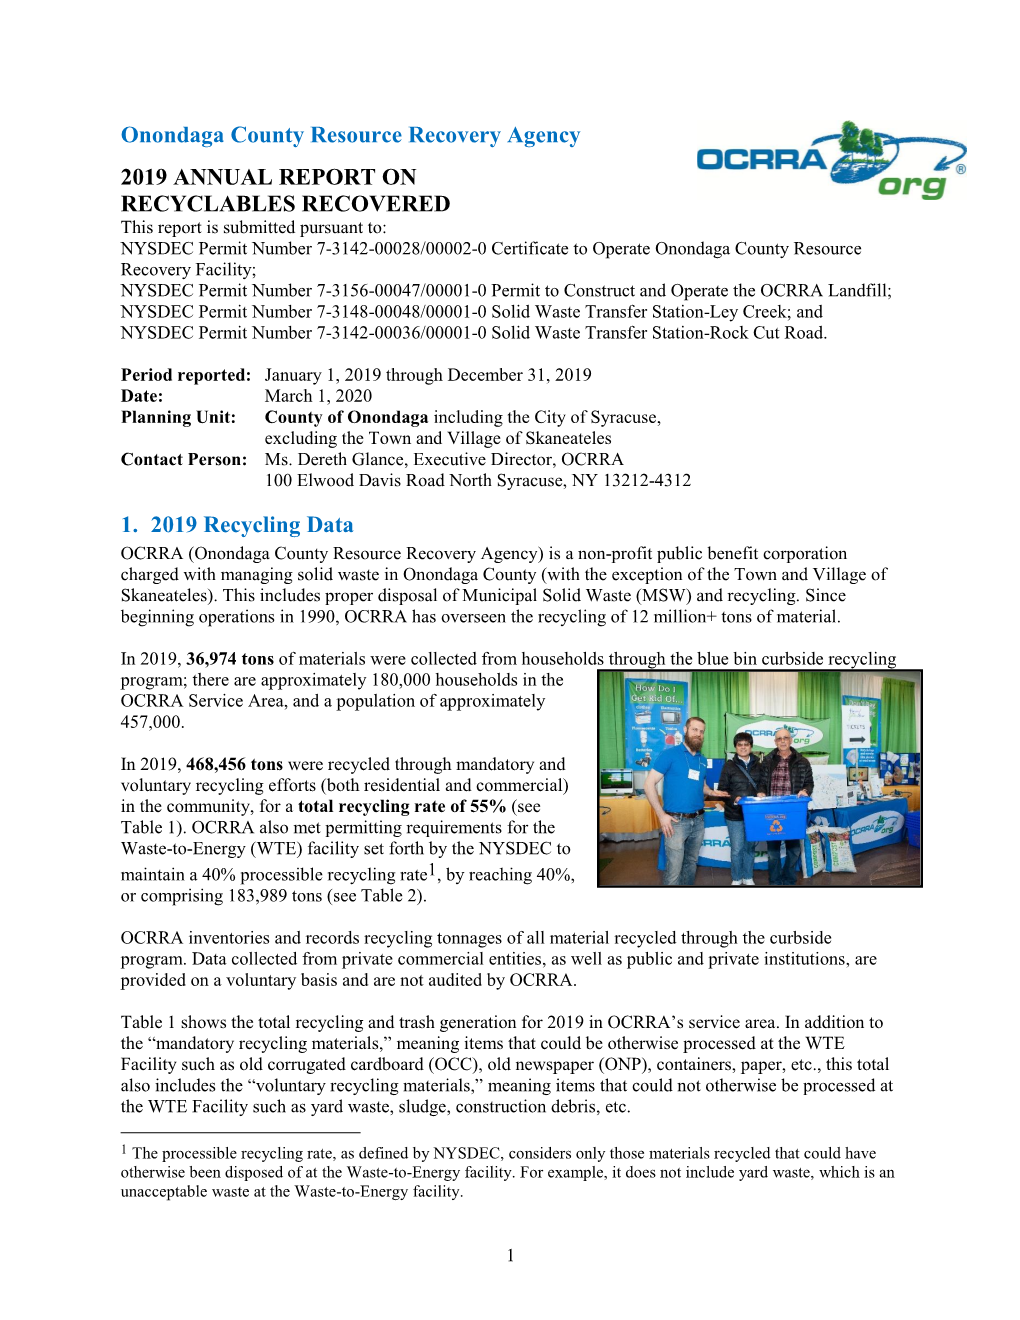 2019 Annual Report of Recyclables